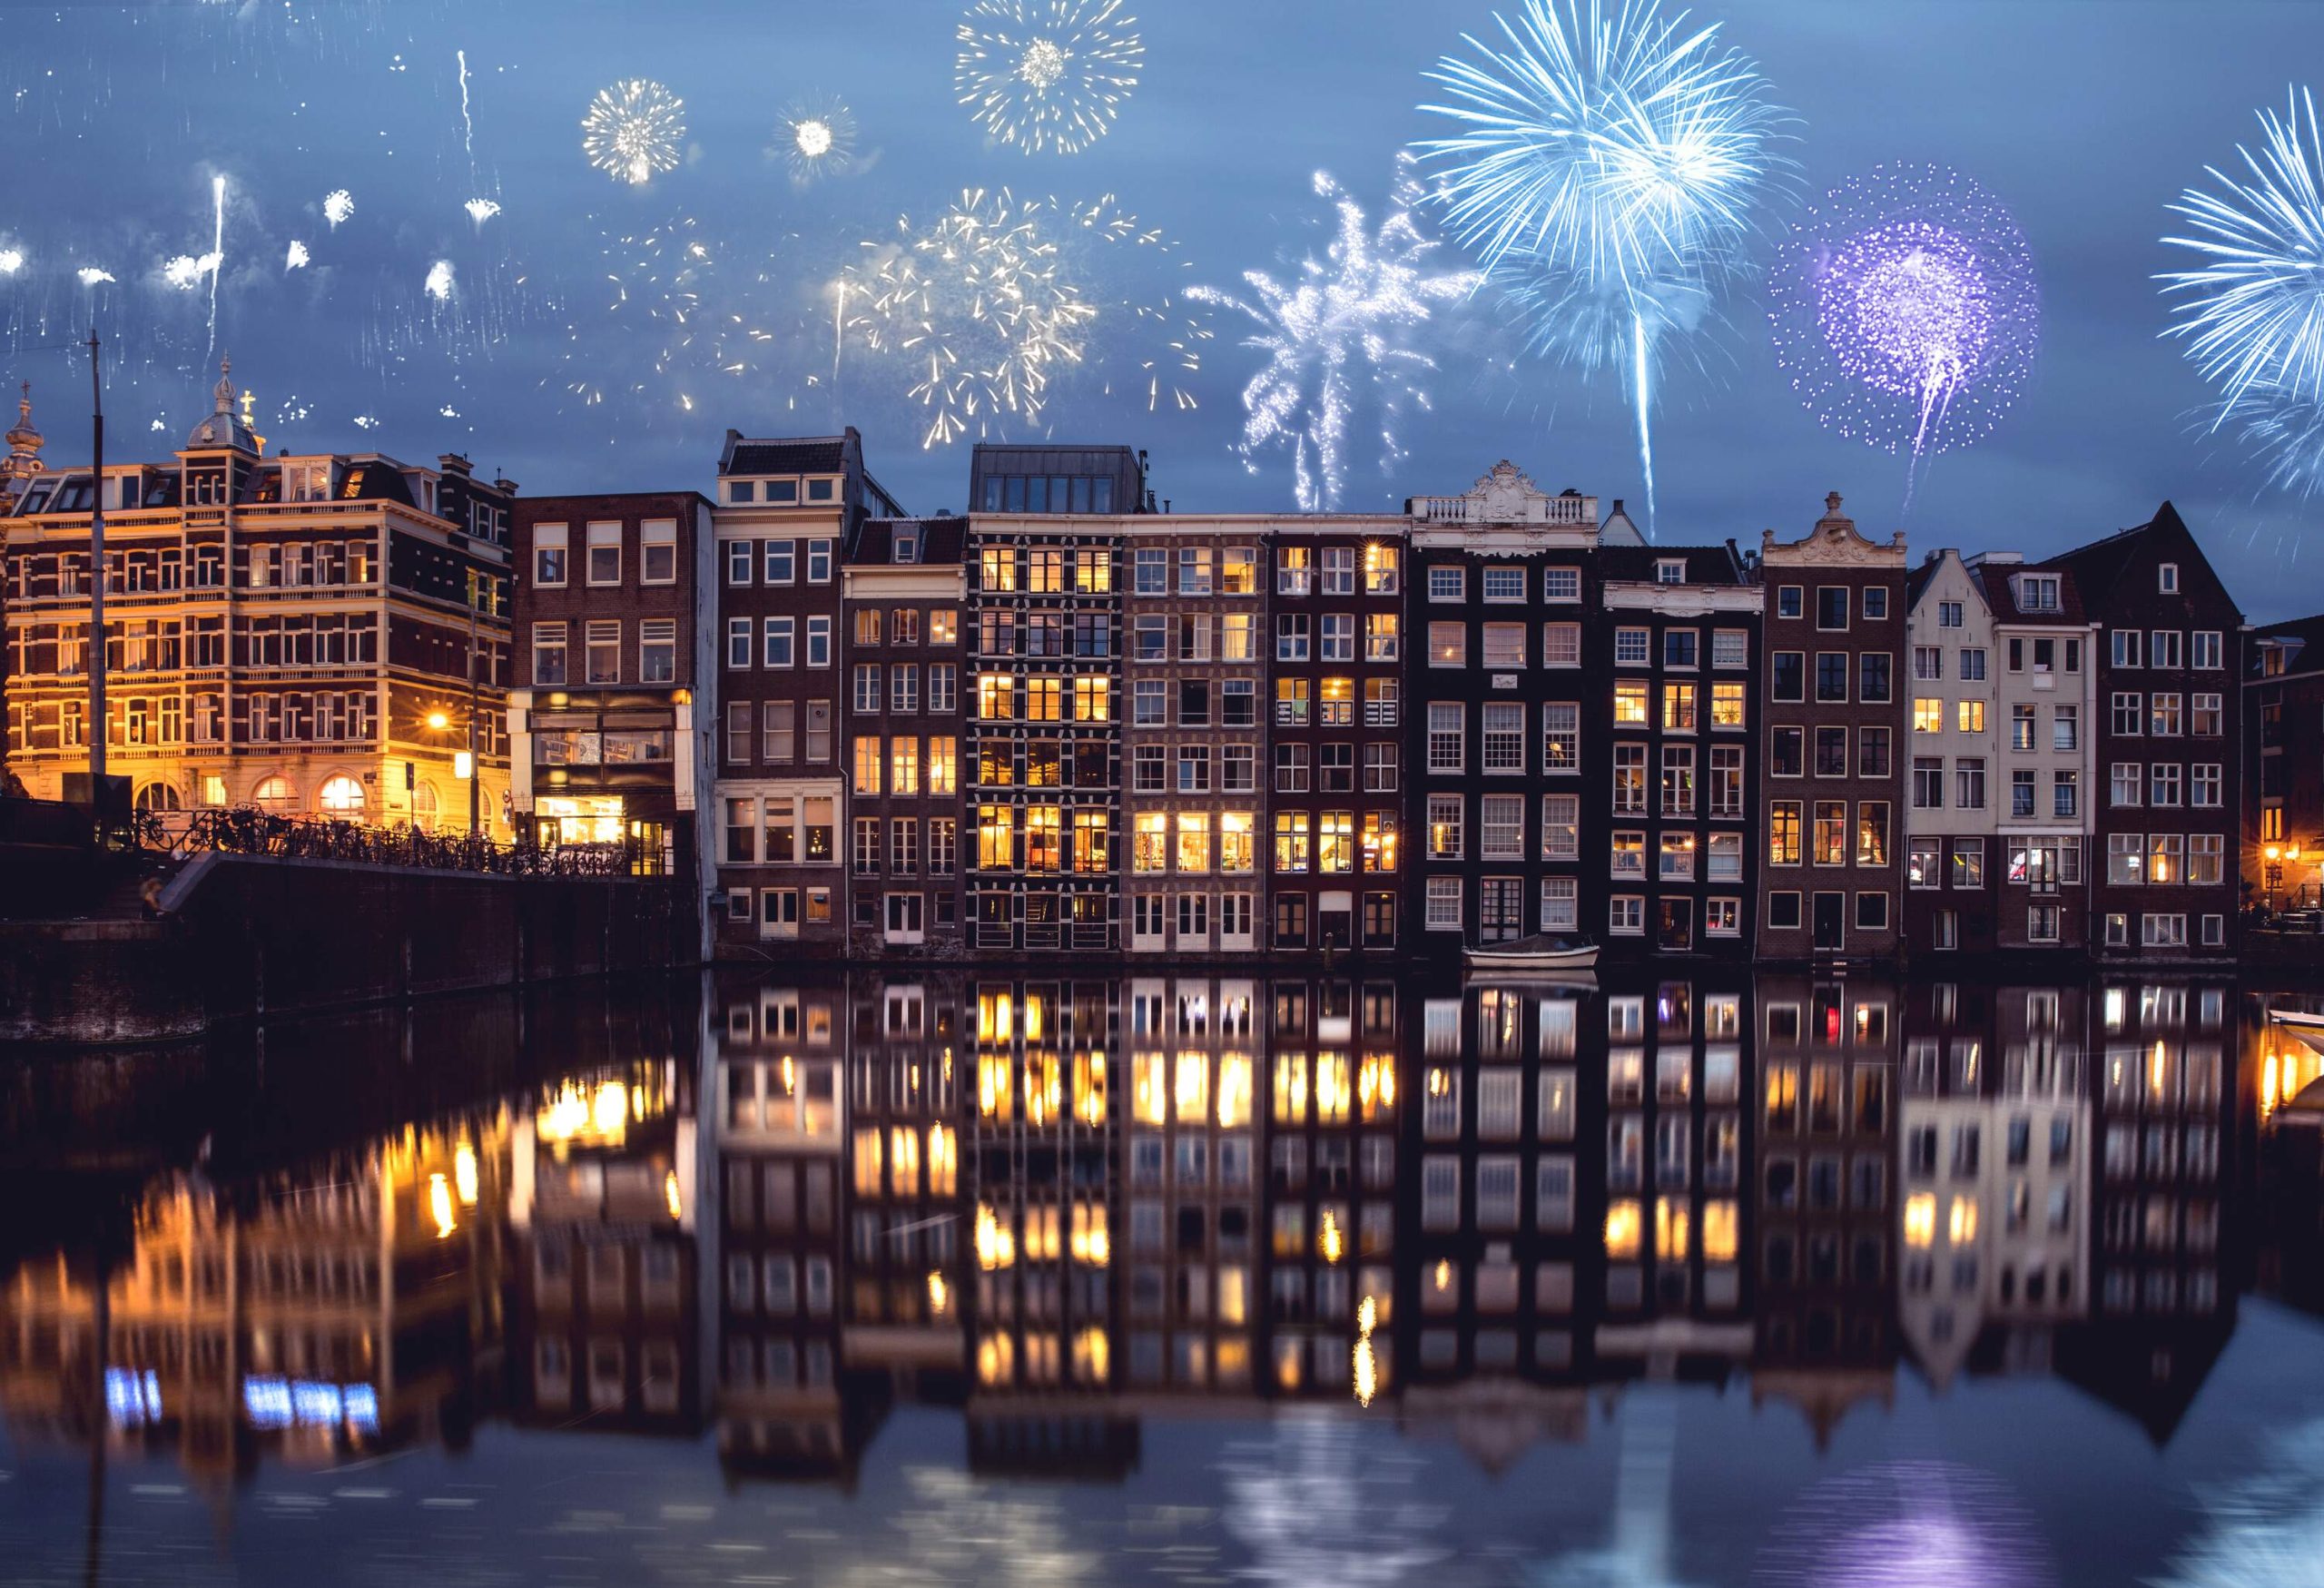 Fireworks bursting in the night sky above the canal-side buildings.